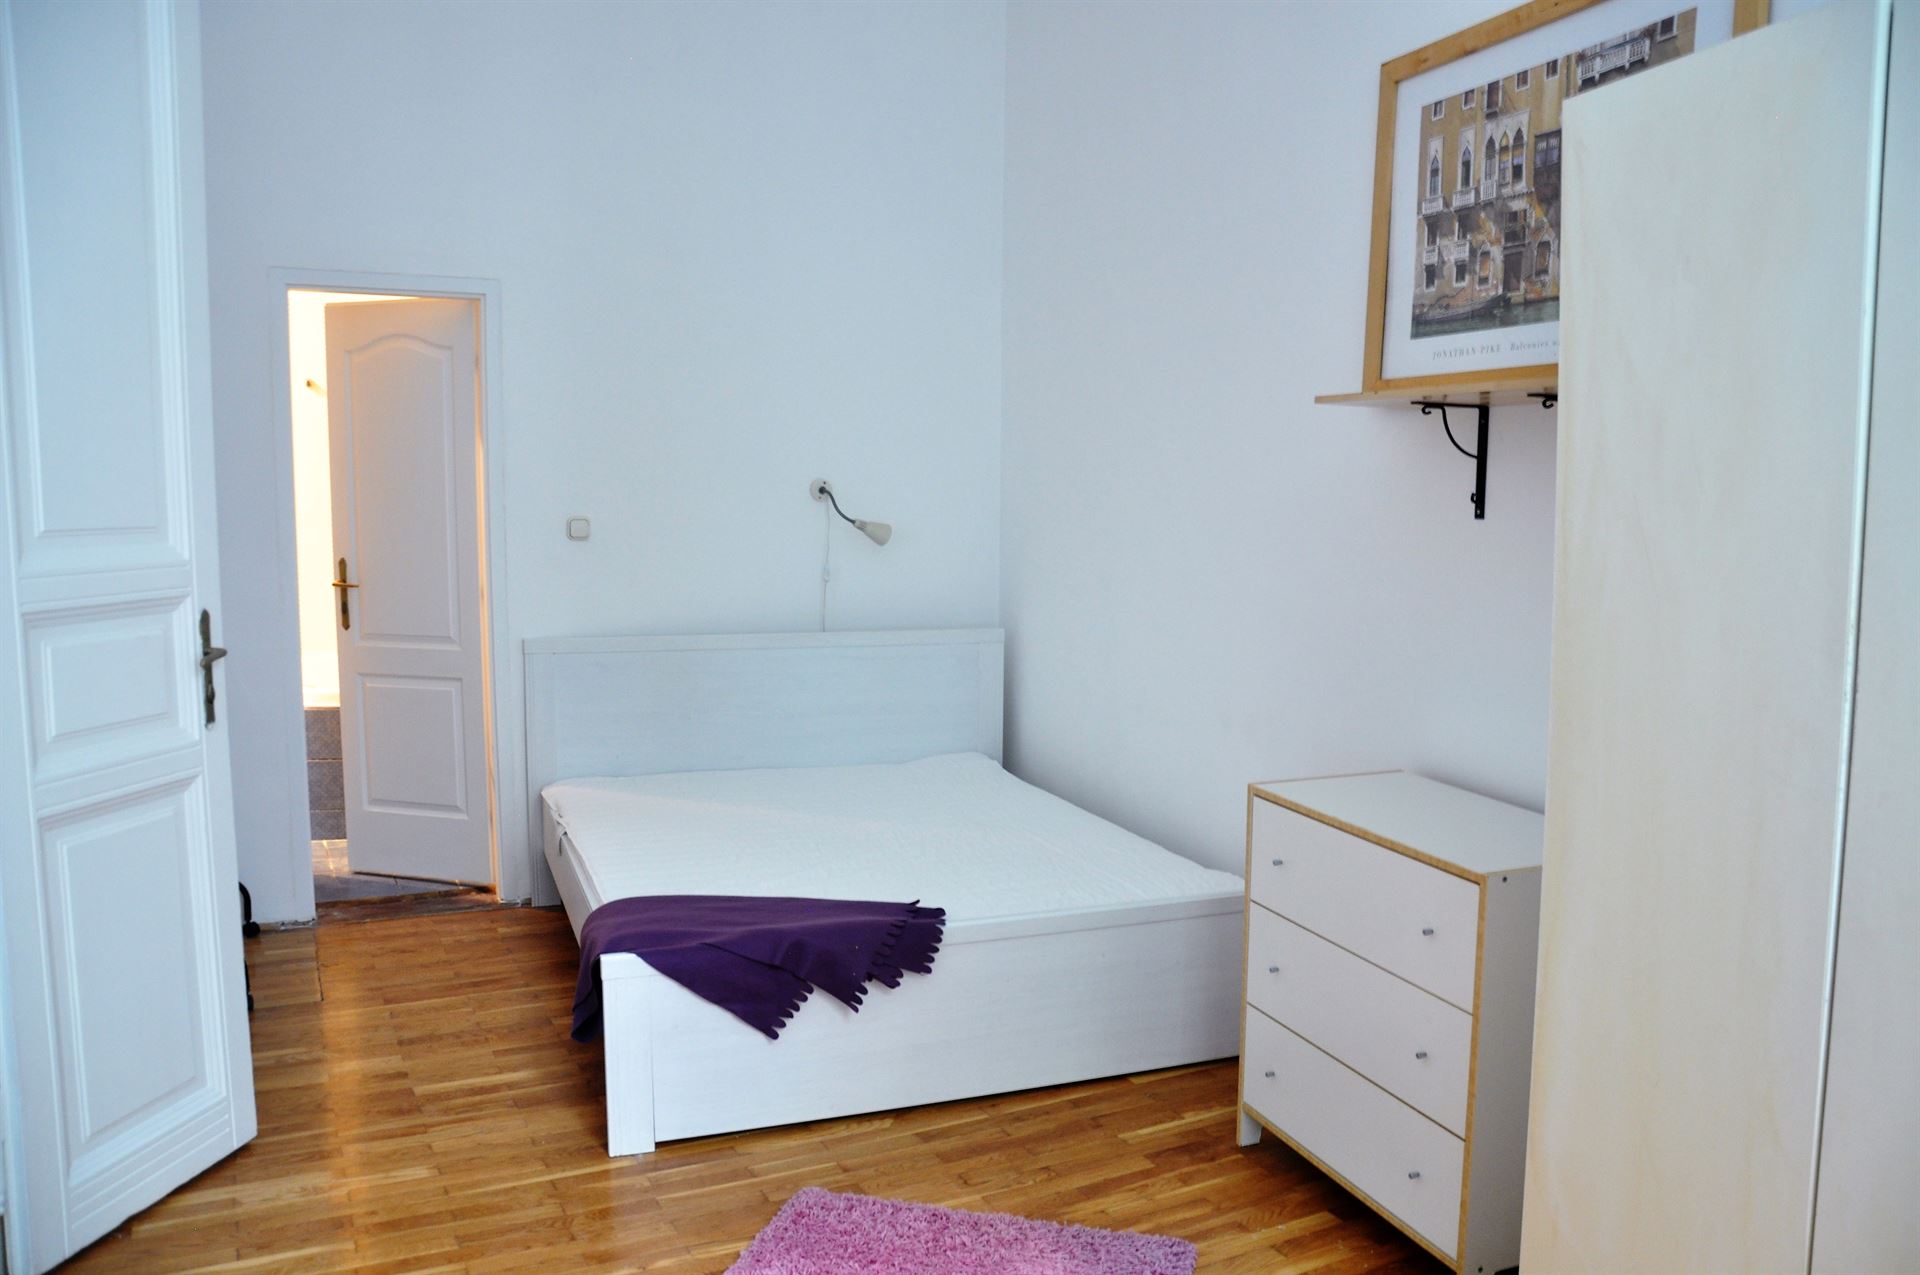 budapest-apartment-for-sale-near-kalvin-district-5-investment-property-for-sale-real-estate-budapest-downtown10